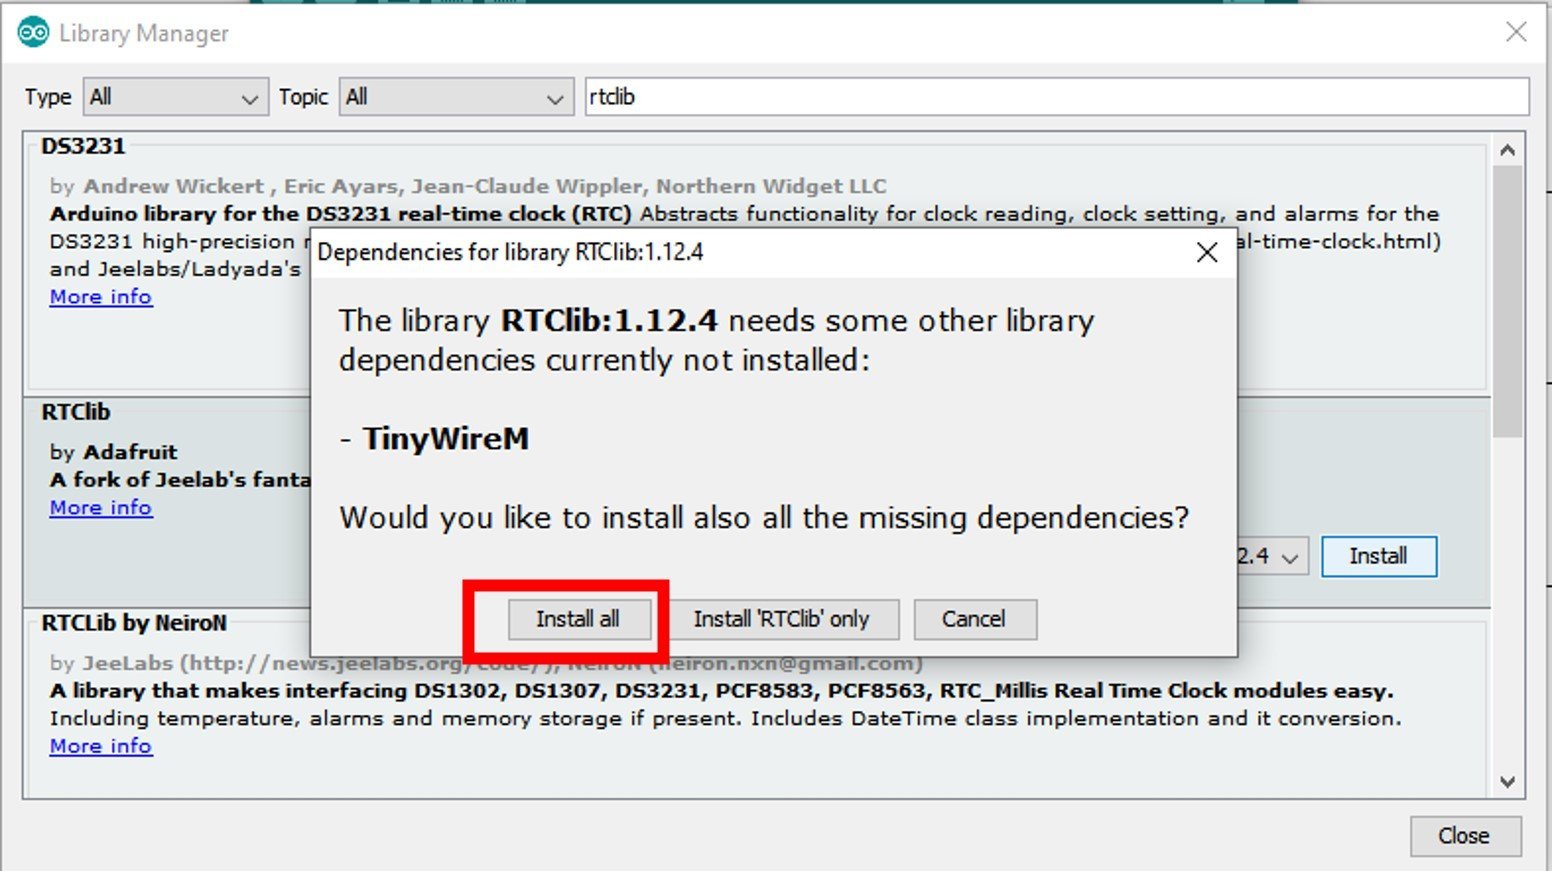 DS3231 library software dependency libraries